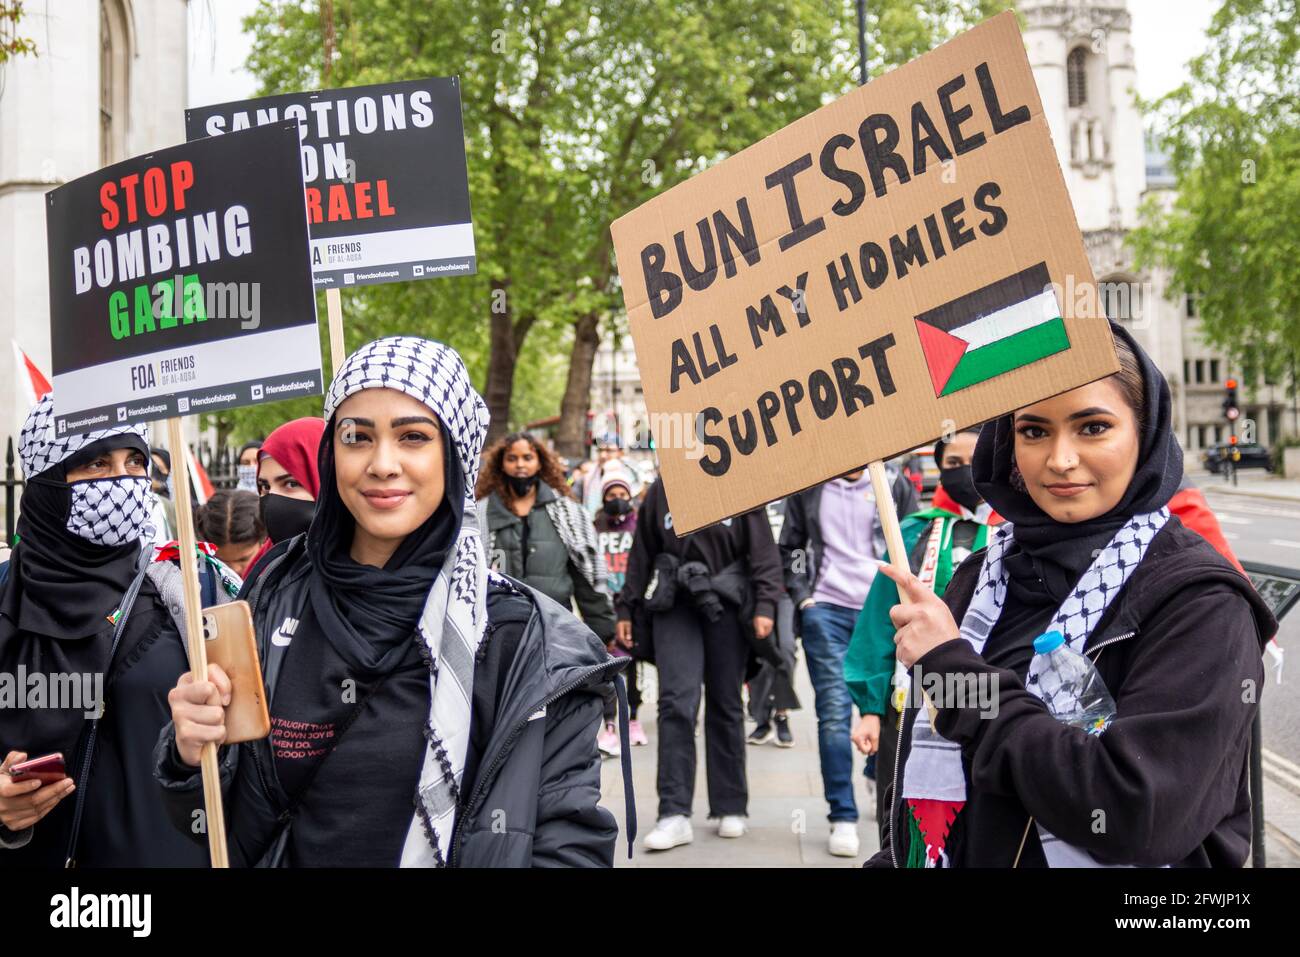 Protesters at a pro Palestine demonstration march in London, UK. Young females with placards, one with bun Israel, all my homies support Palestine Stock Photo